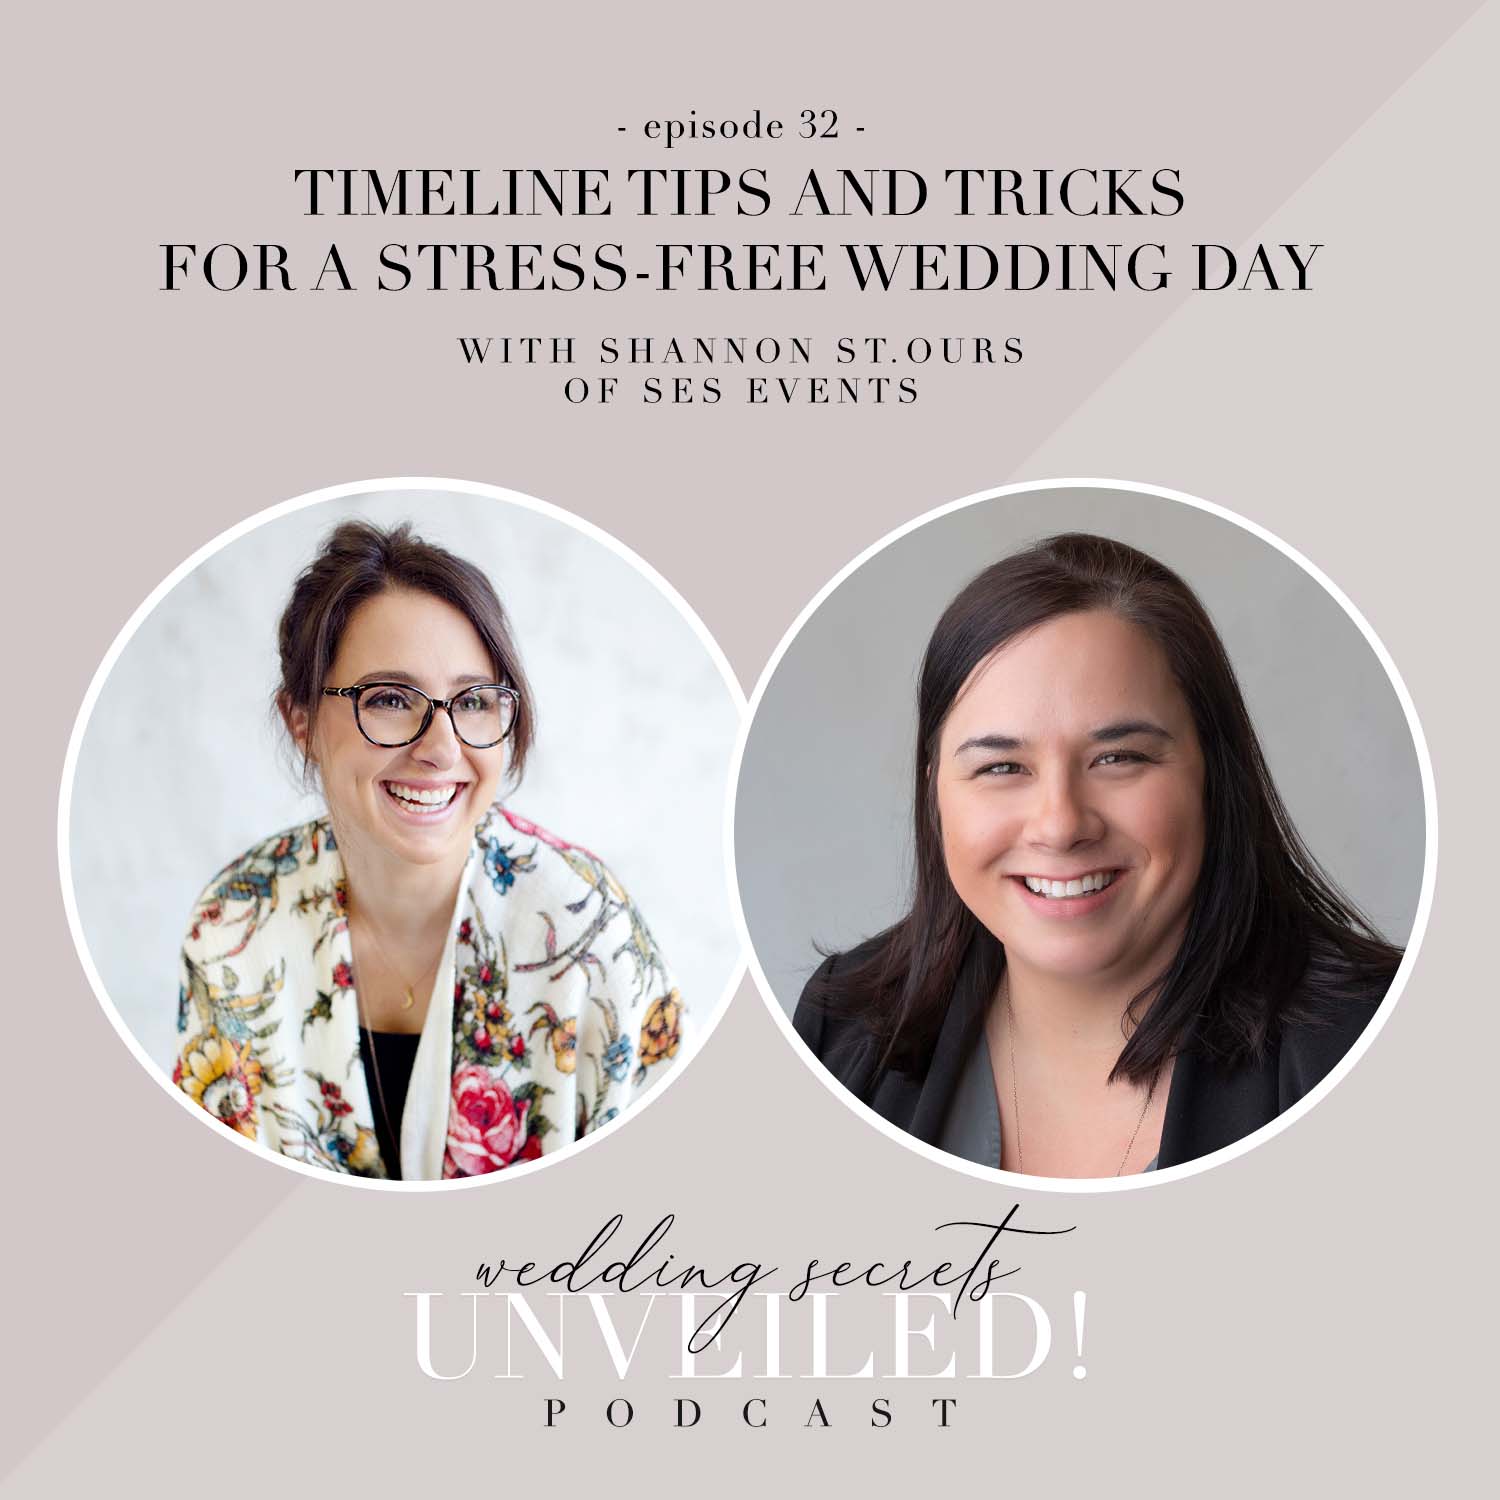 Timeline Tips and Tricks for a Stress-Free Wedding Day: Interview with Shannon St. Ours of SES Events on Wedding Secrets Unveiled!